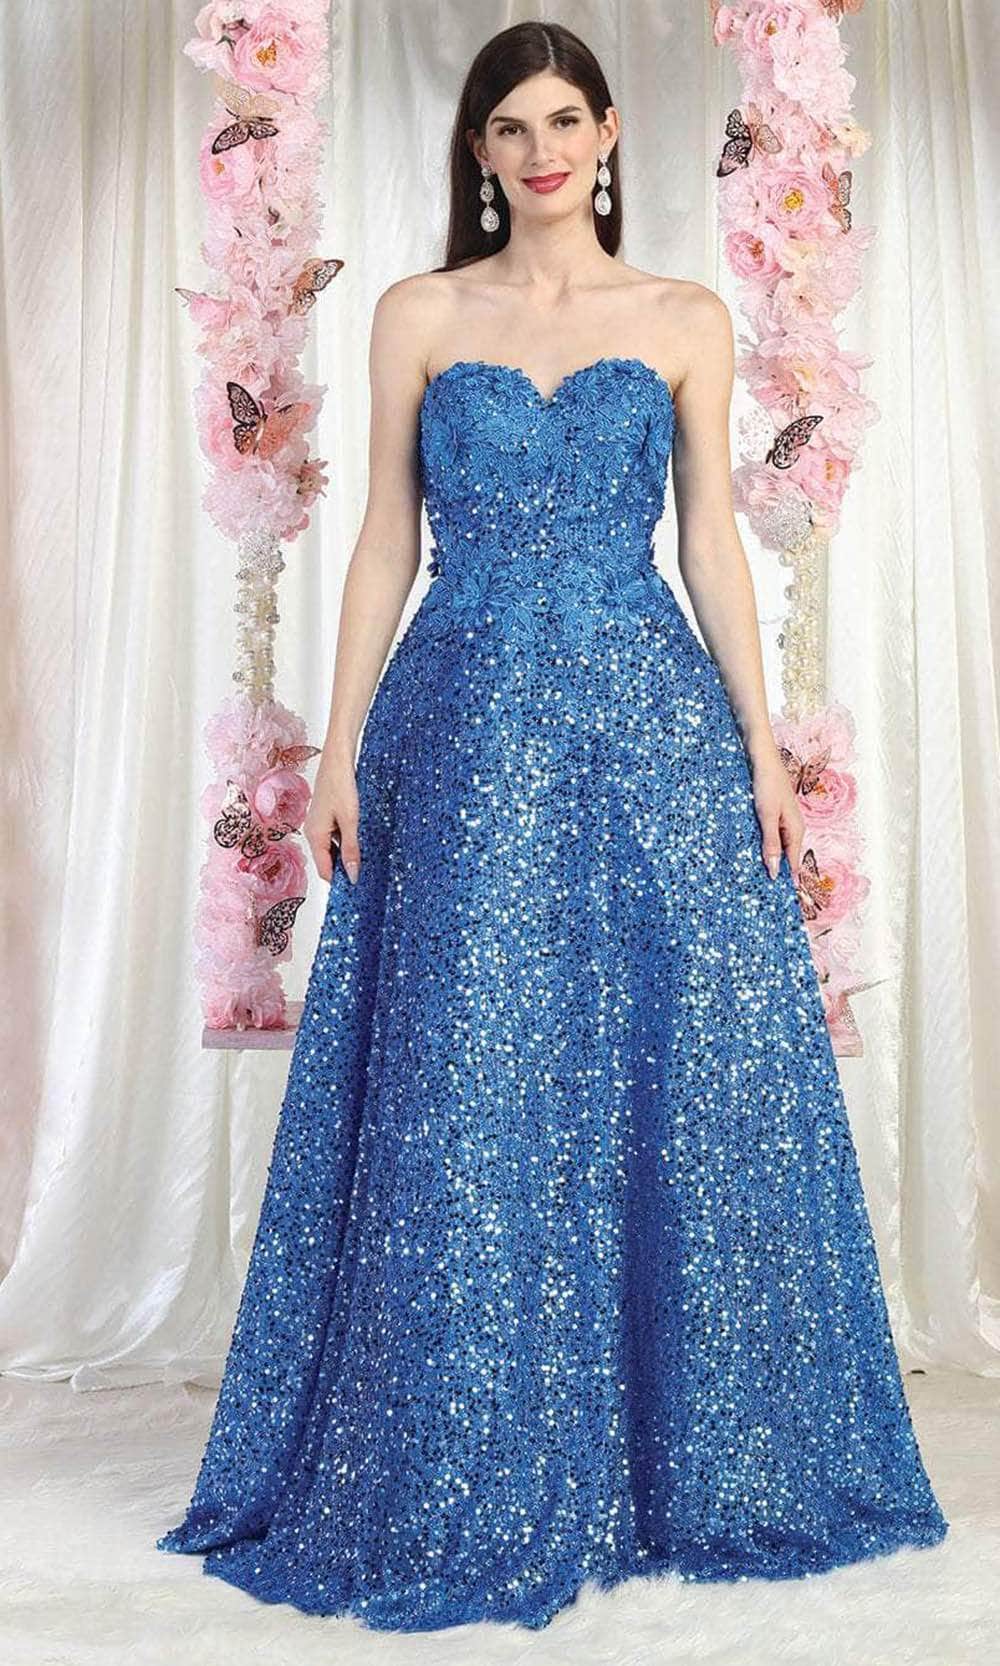 Image of May Queen RQ8025 - Sweetheart Sequin Appliqued Prom Gown